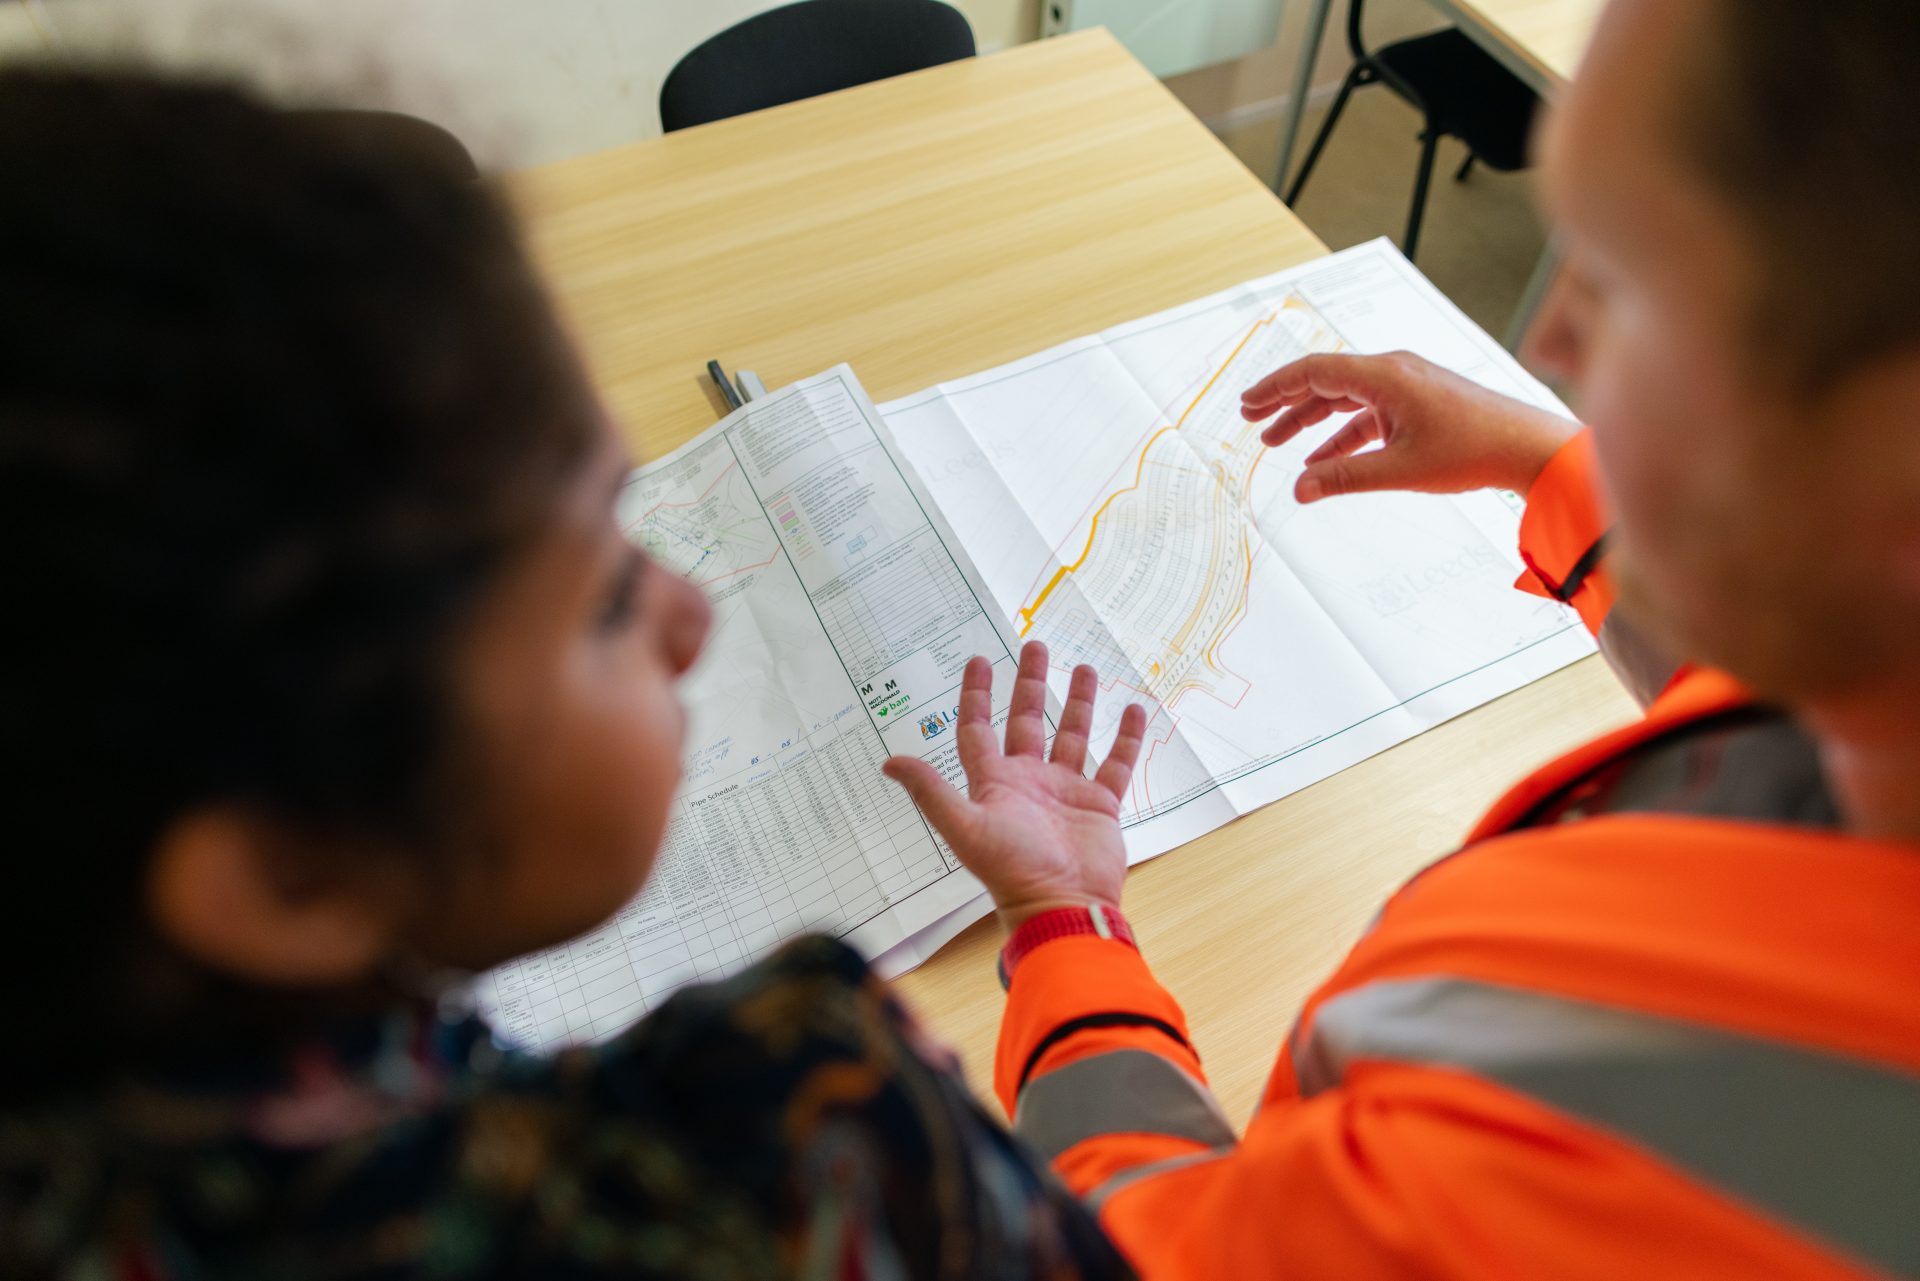 Two people are standing in front of a planning map on the table. One of them is wearing an orange high-visibility vest.